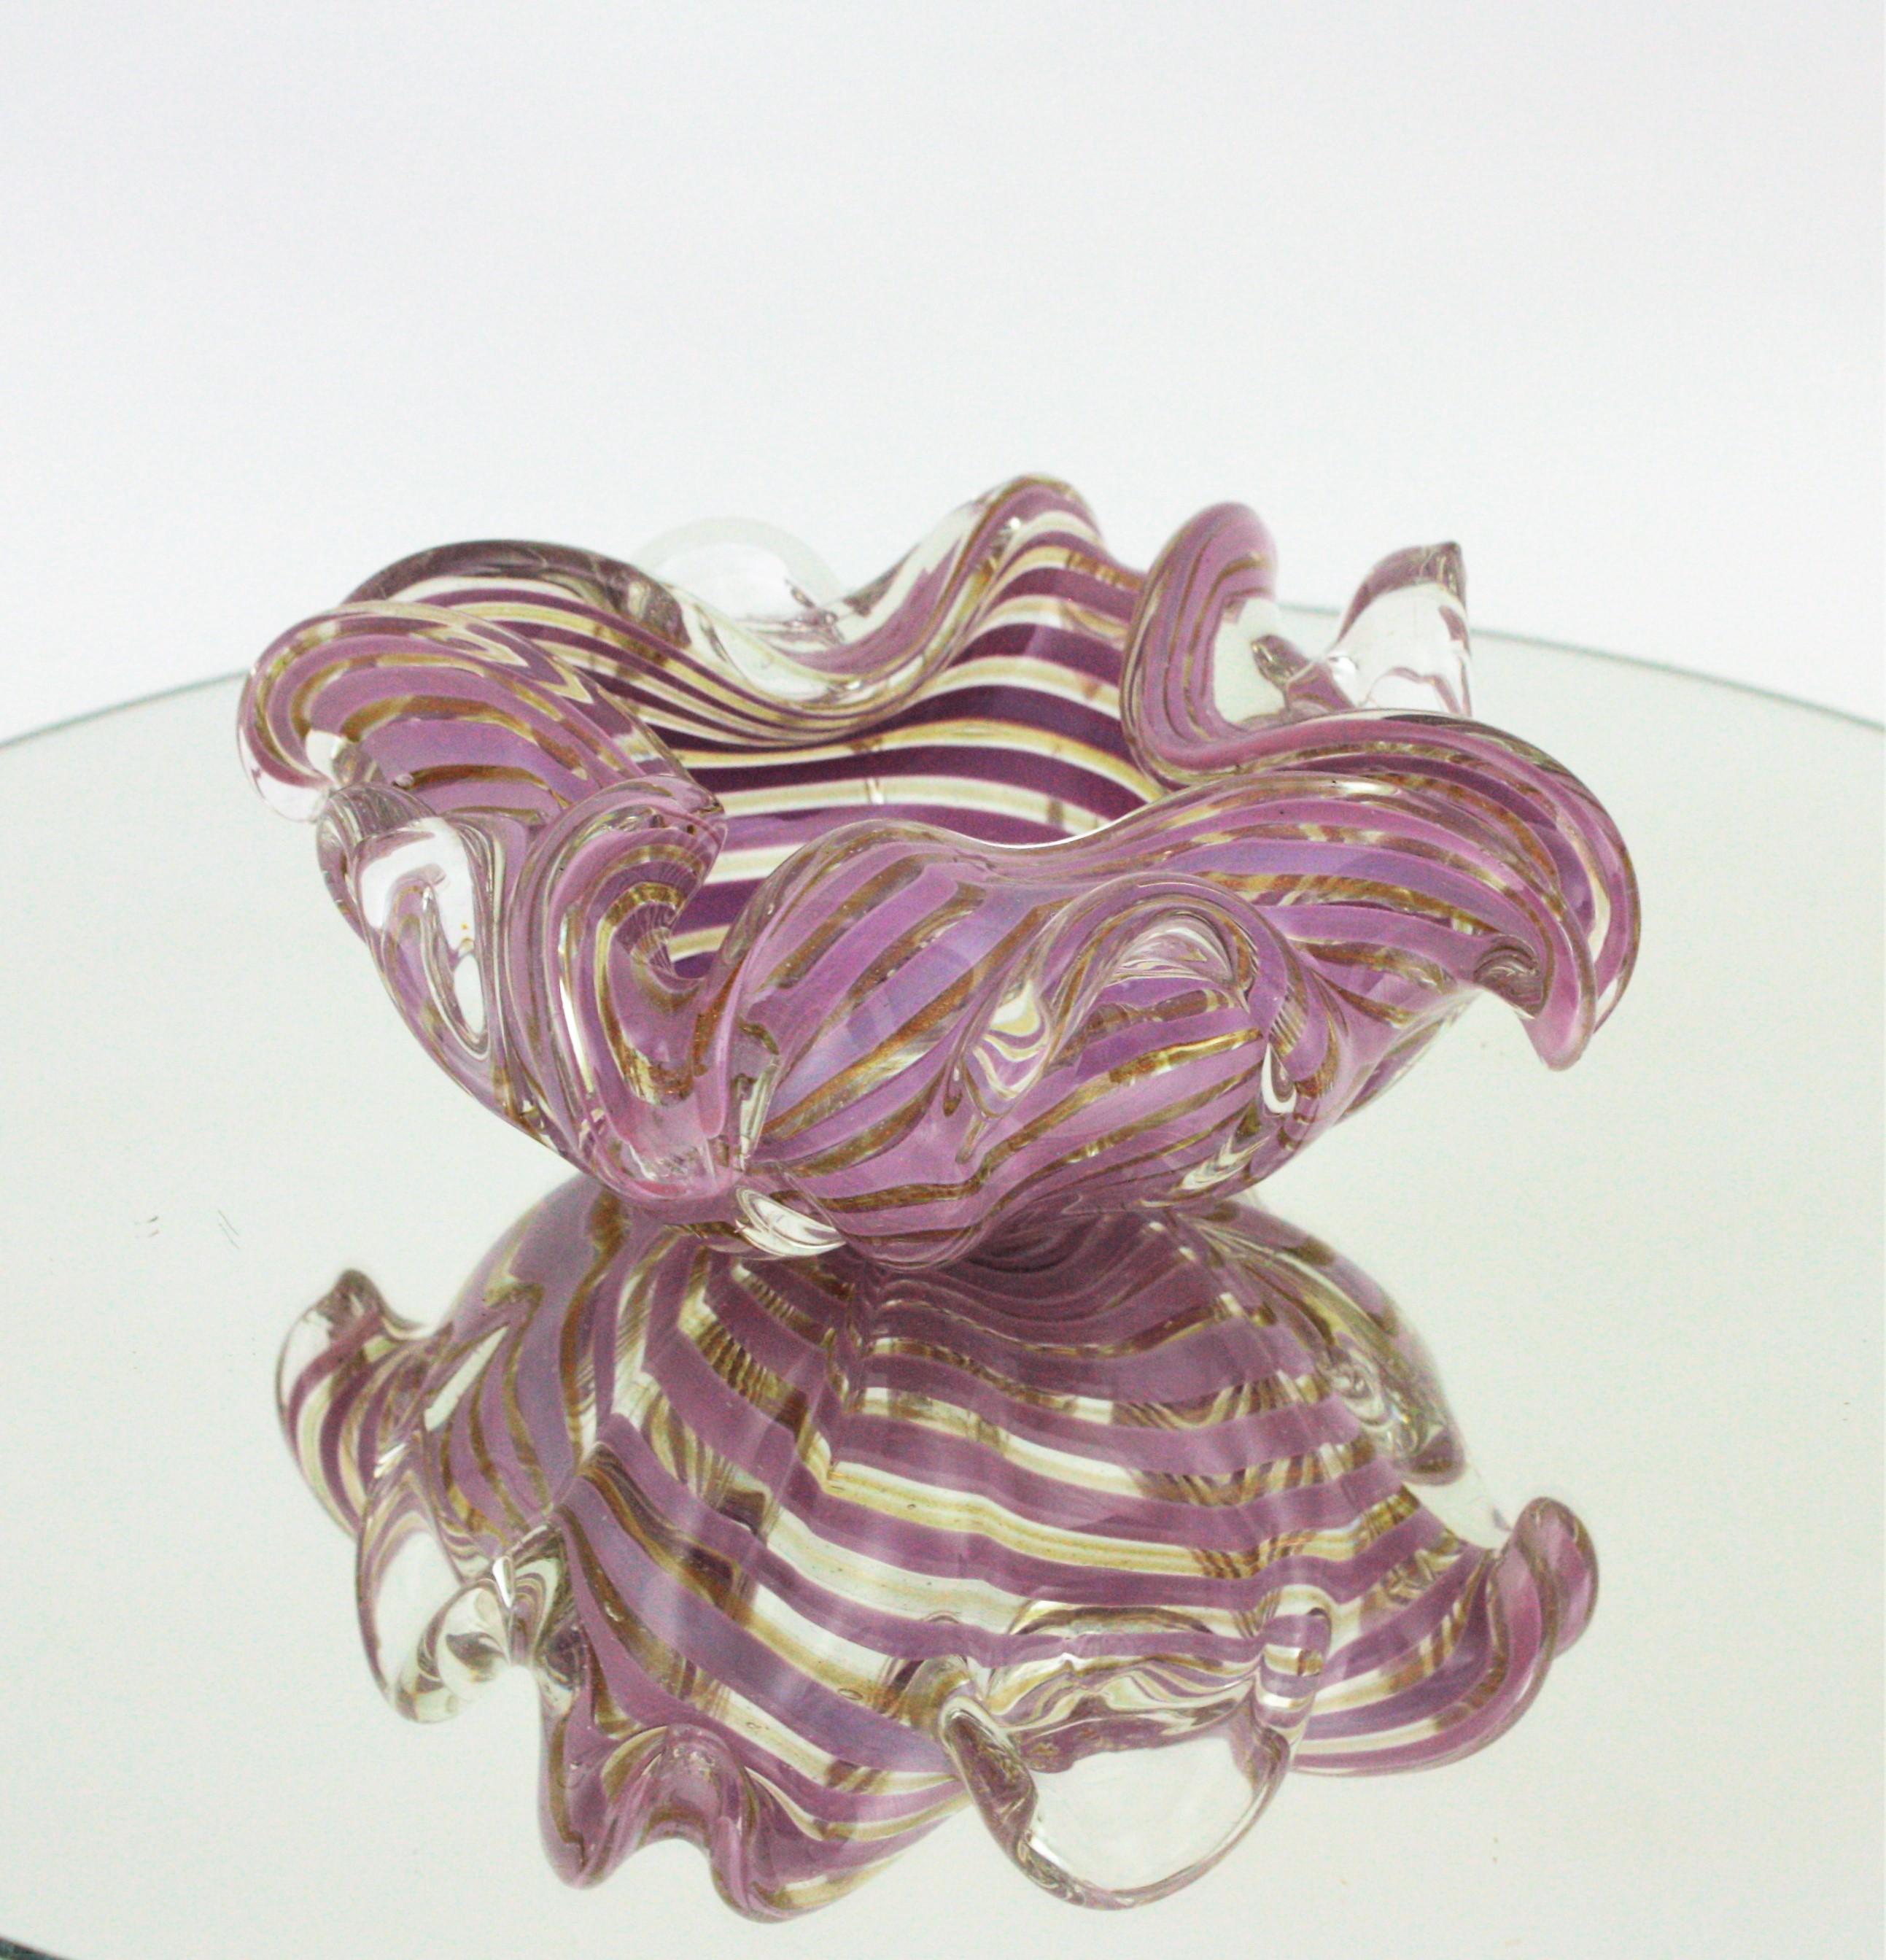 Fratelli Toso Murano Glass Lilac Swirl Ribbons & Gold Dust Large Bowl / Ashtray For Sale 1